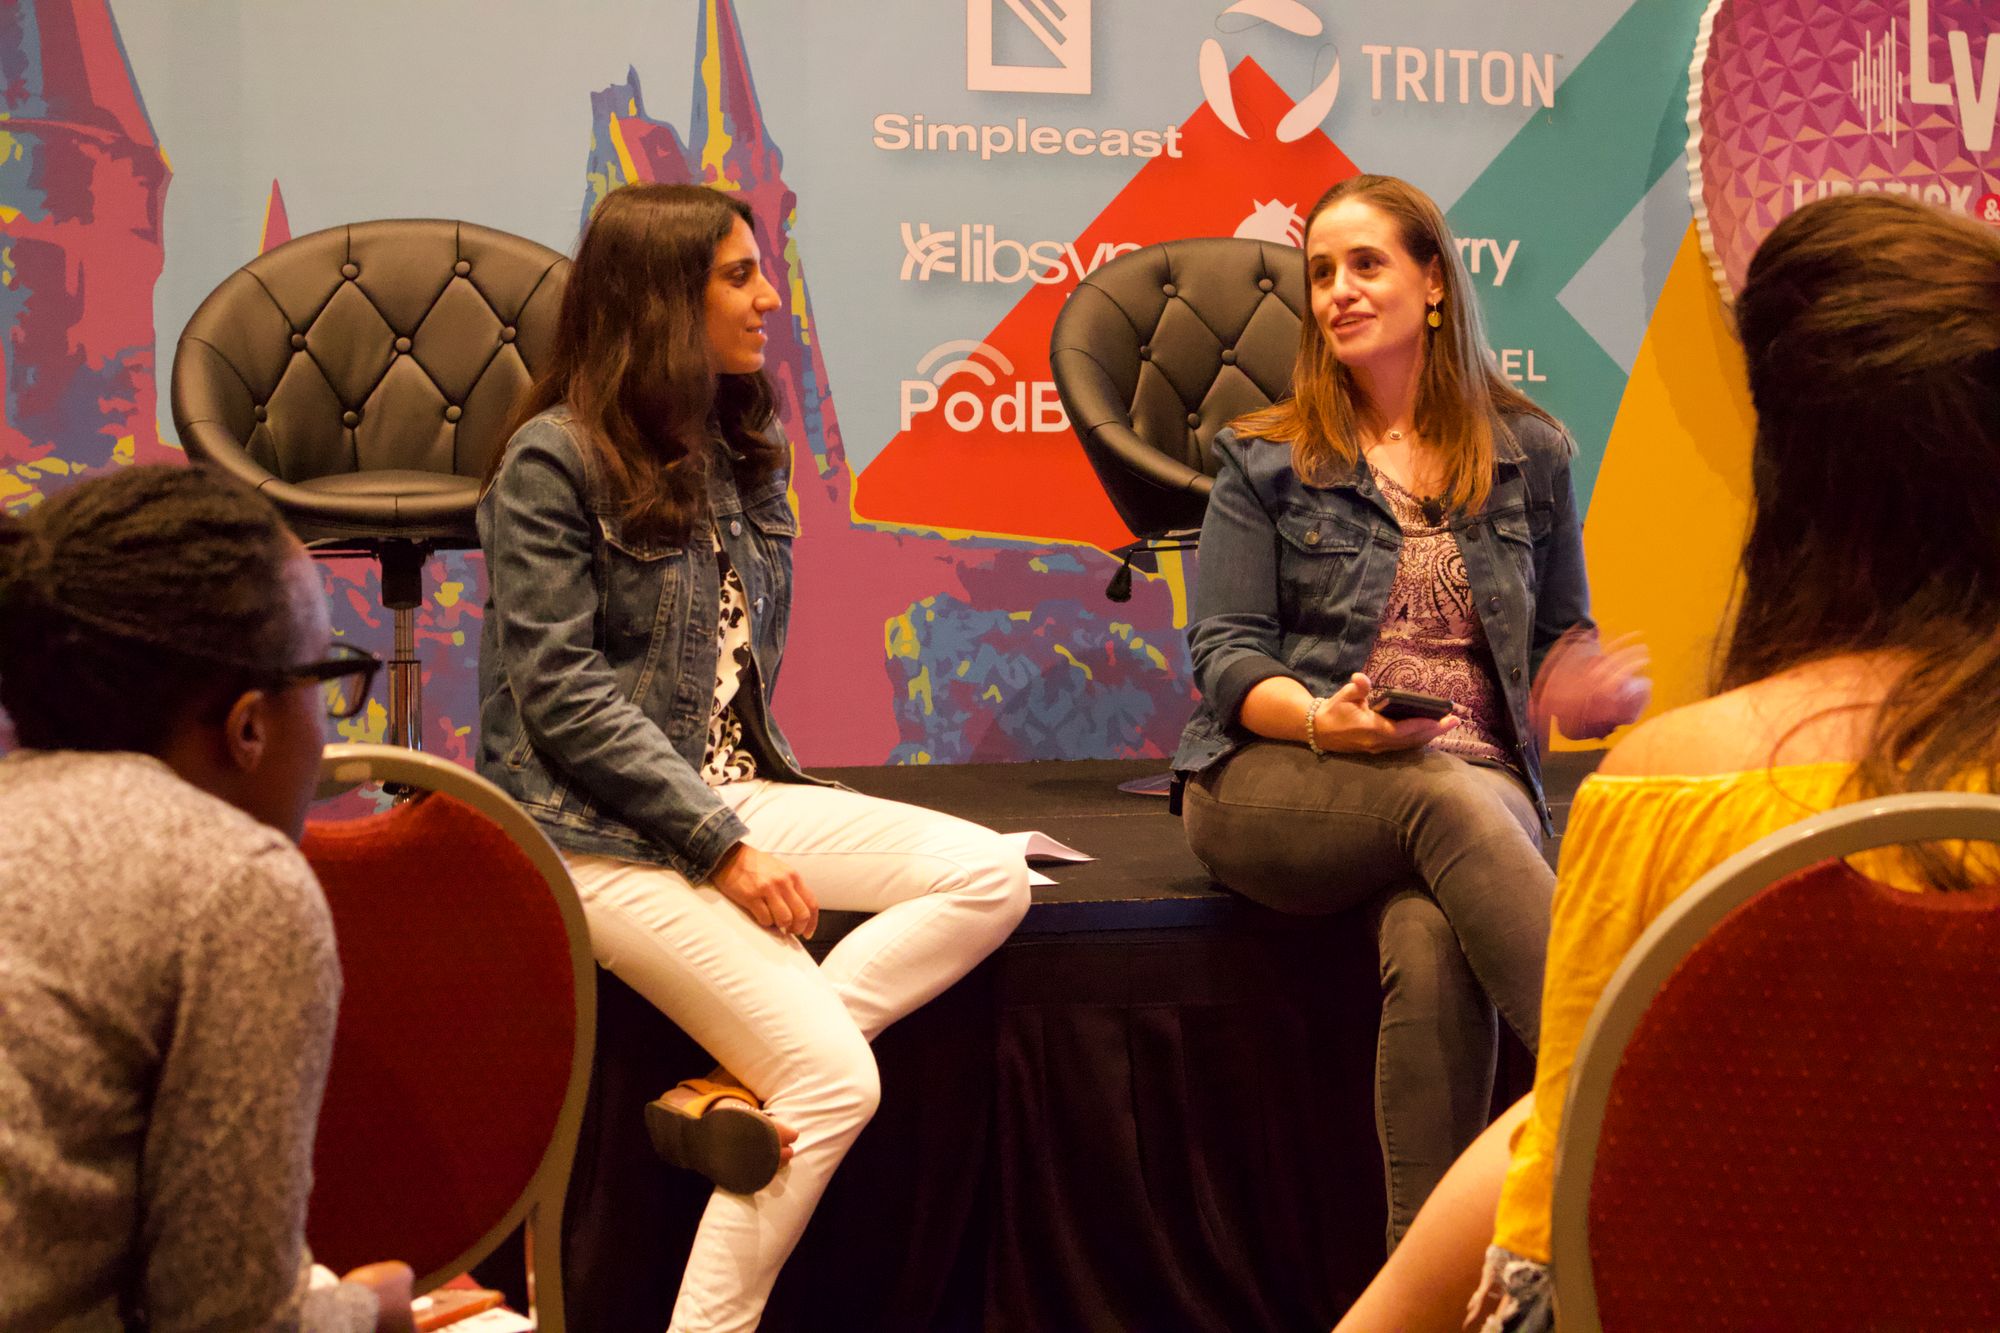 4 Takeaways from PM19’s Podcasting Wage Gap Breakout Session